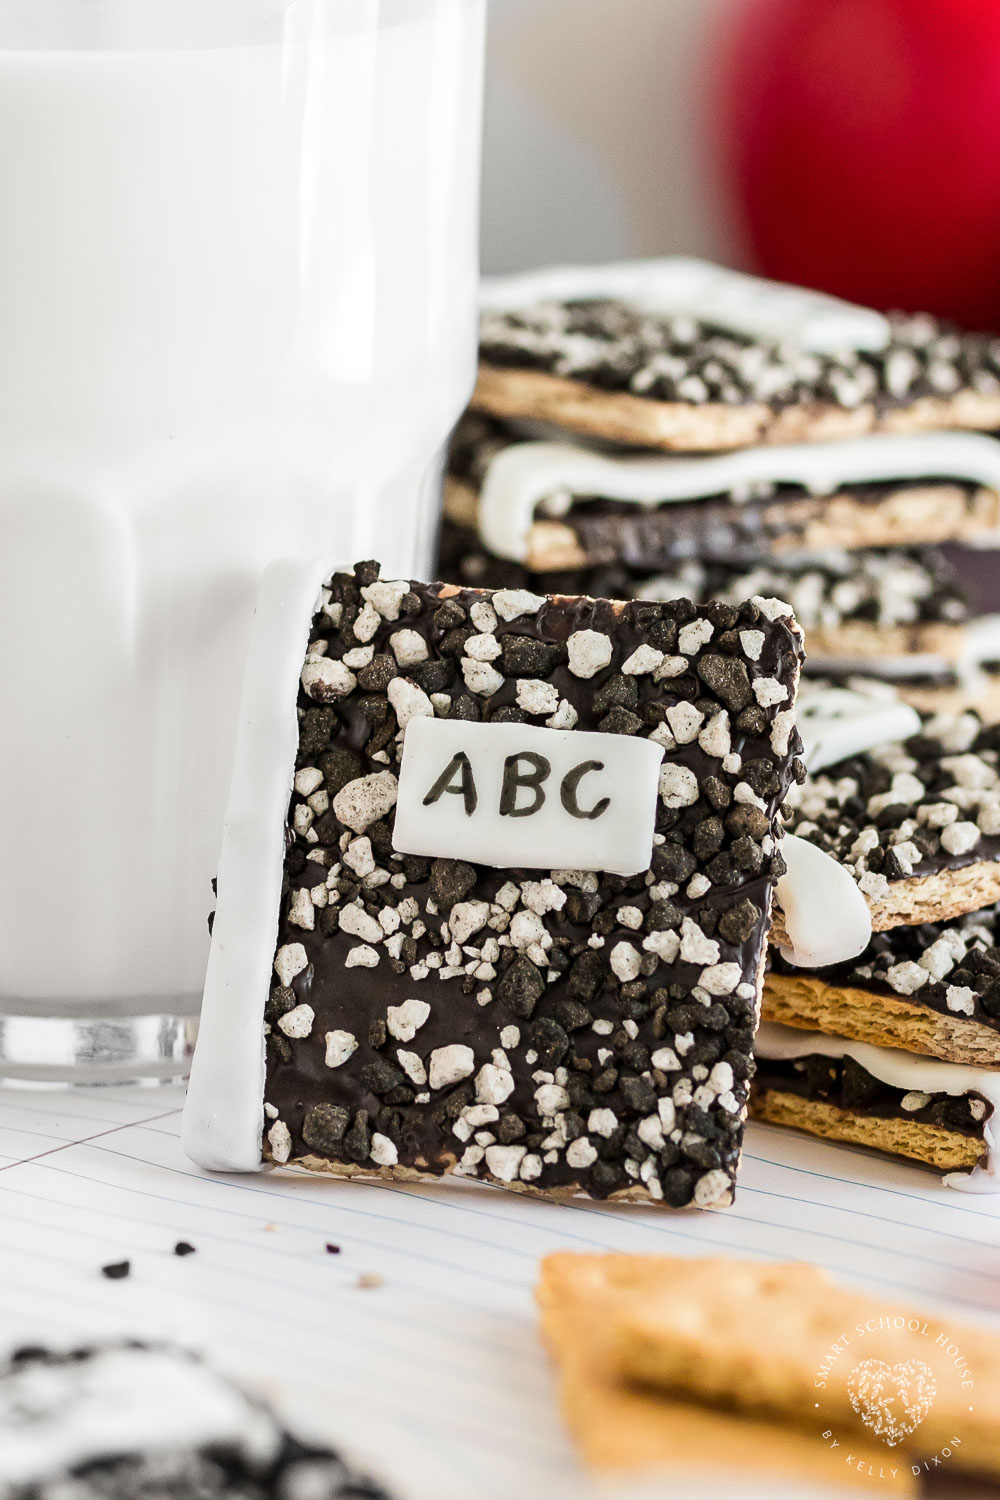 Graham Cracker Notebooks are the perfect back-to-school snack! Made with cookies and cream sprinkles and white fondant, these chocolate-covered graham crackers are adorable treats that can even be given as gifts!